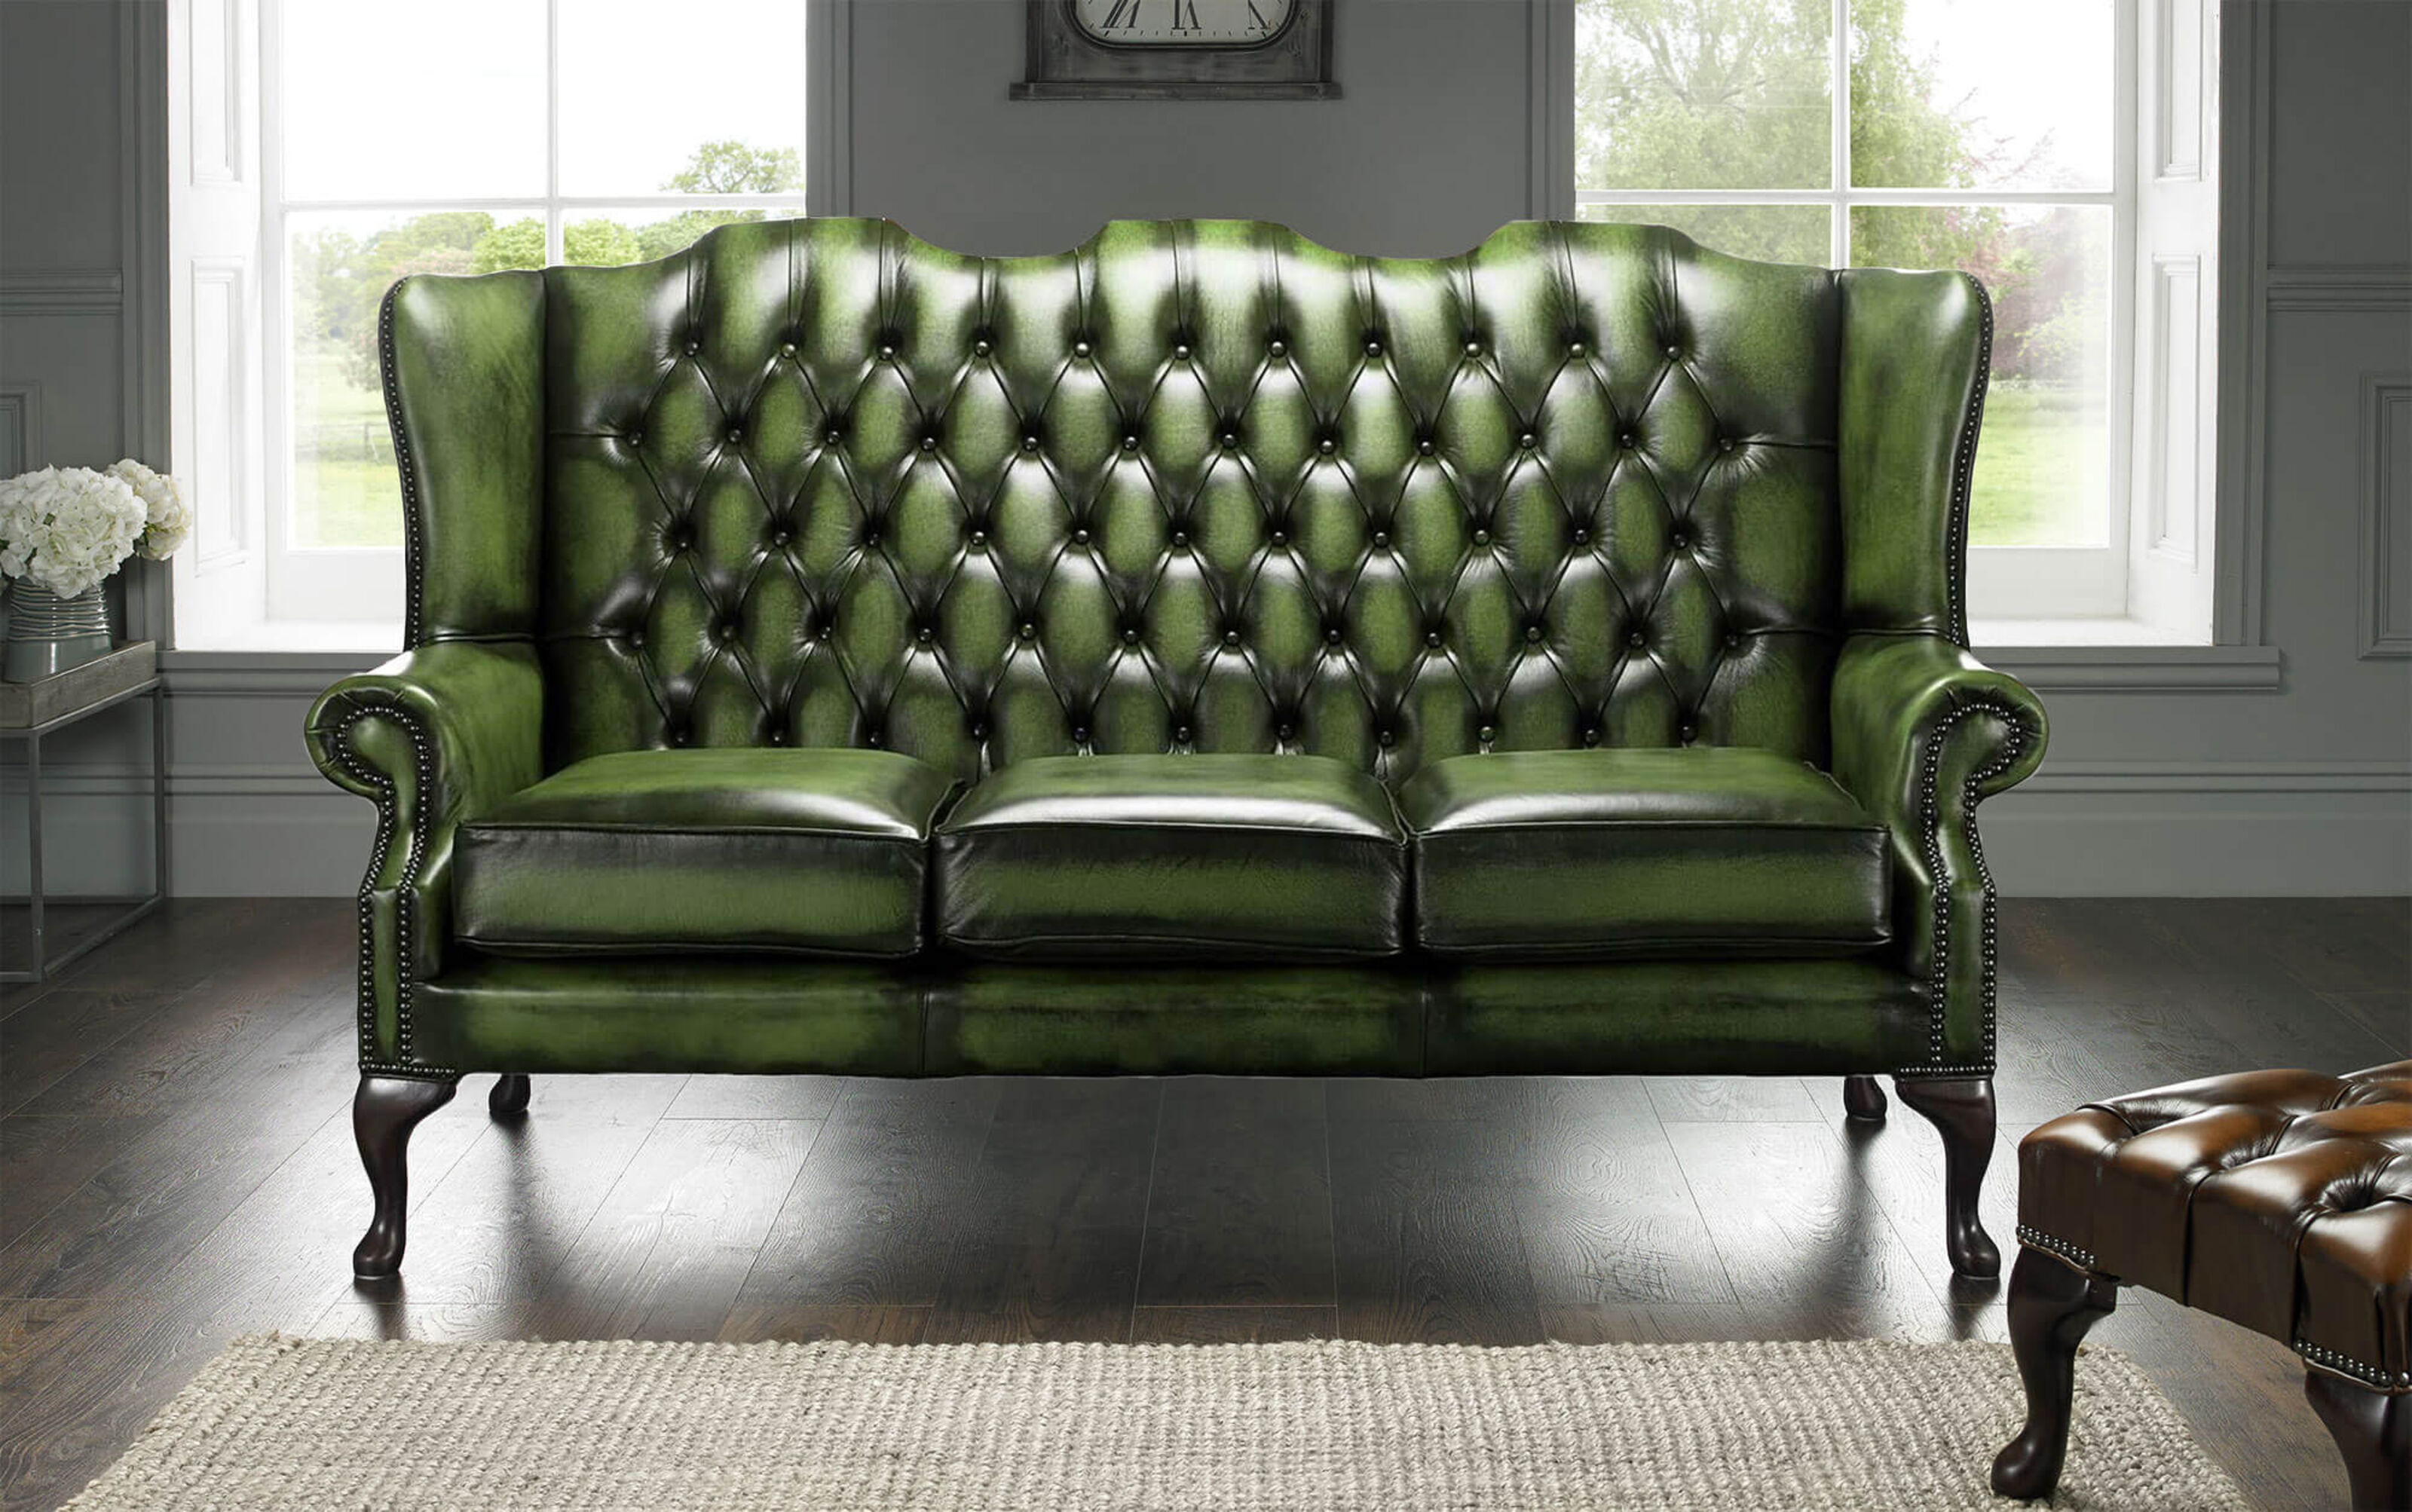 Elevated Elegance: Chesterfield Sofas with High Back Options  %Post Title